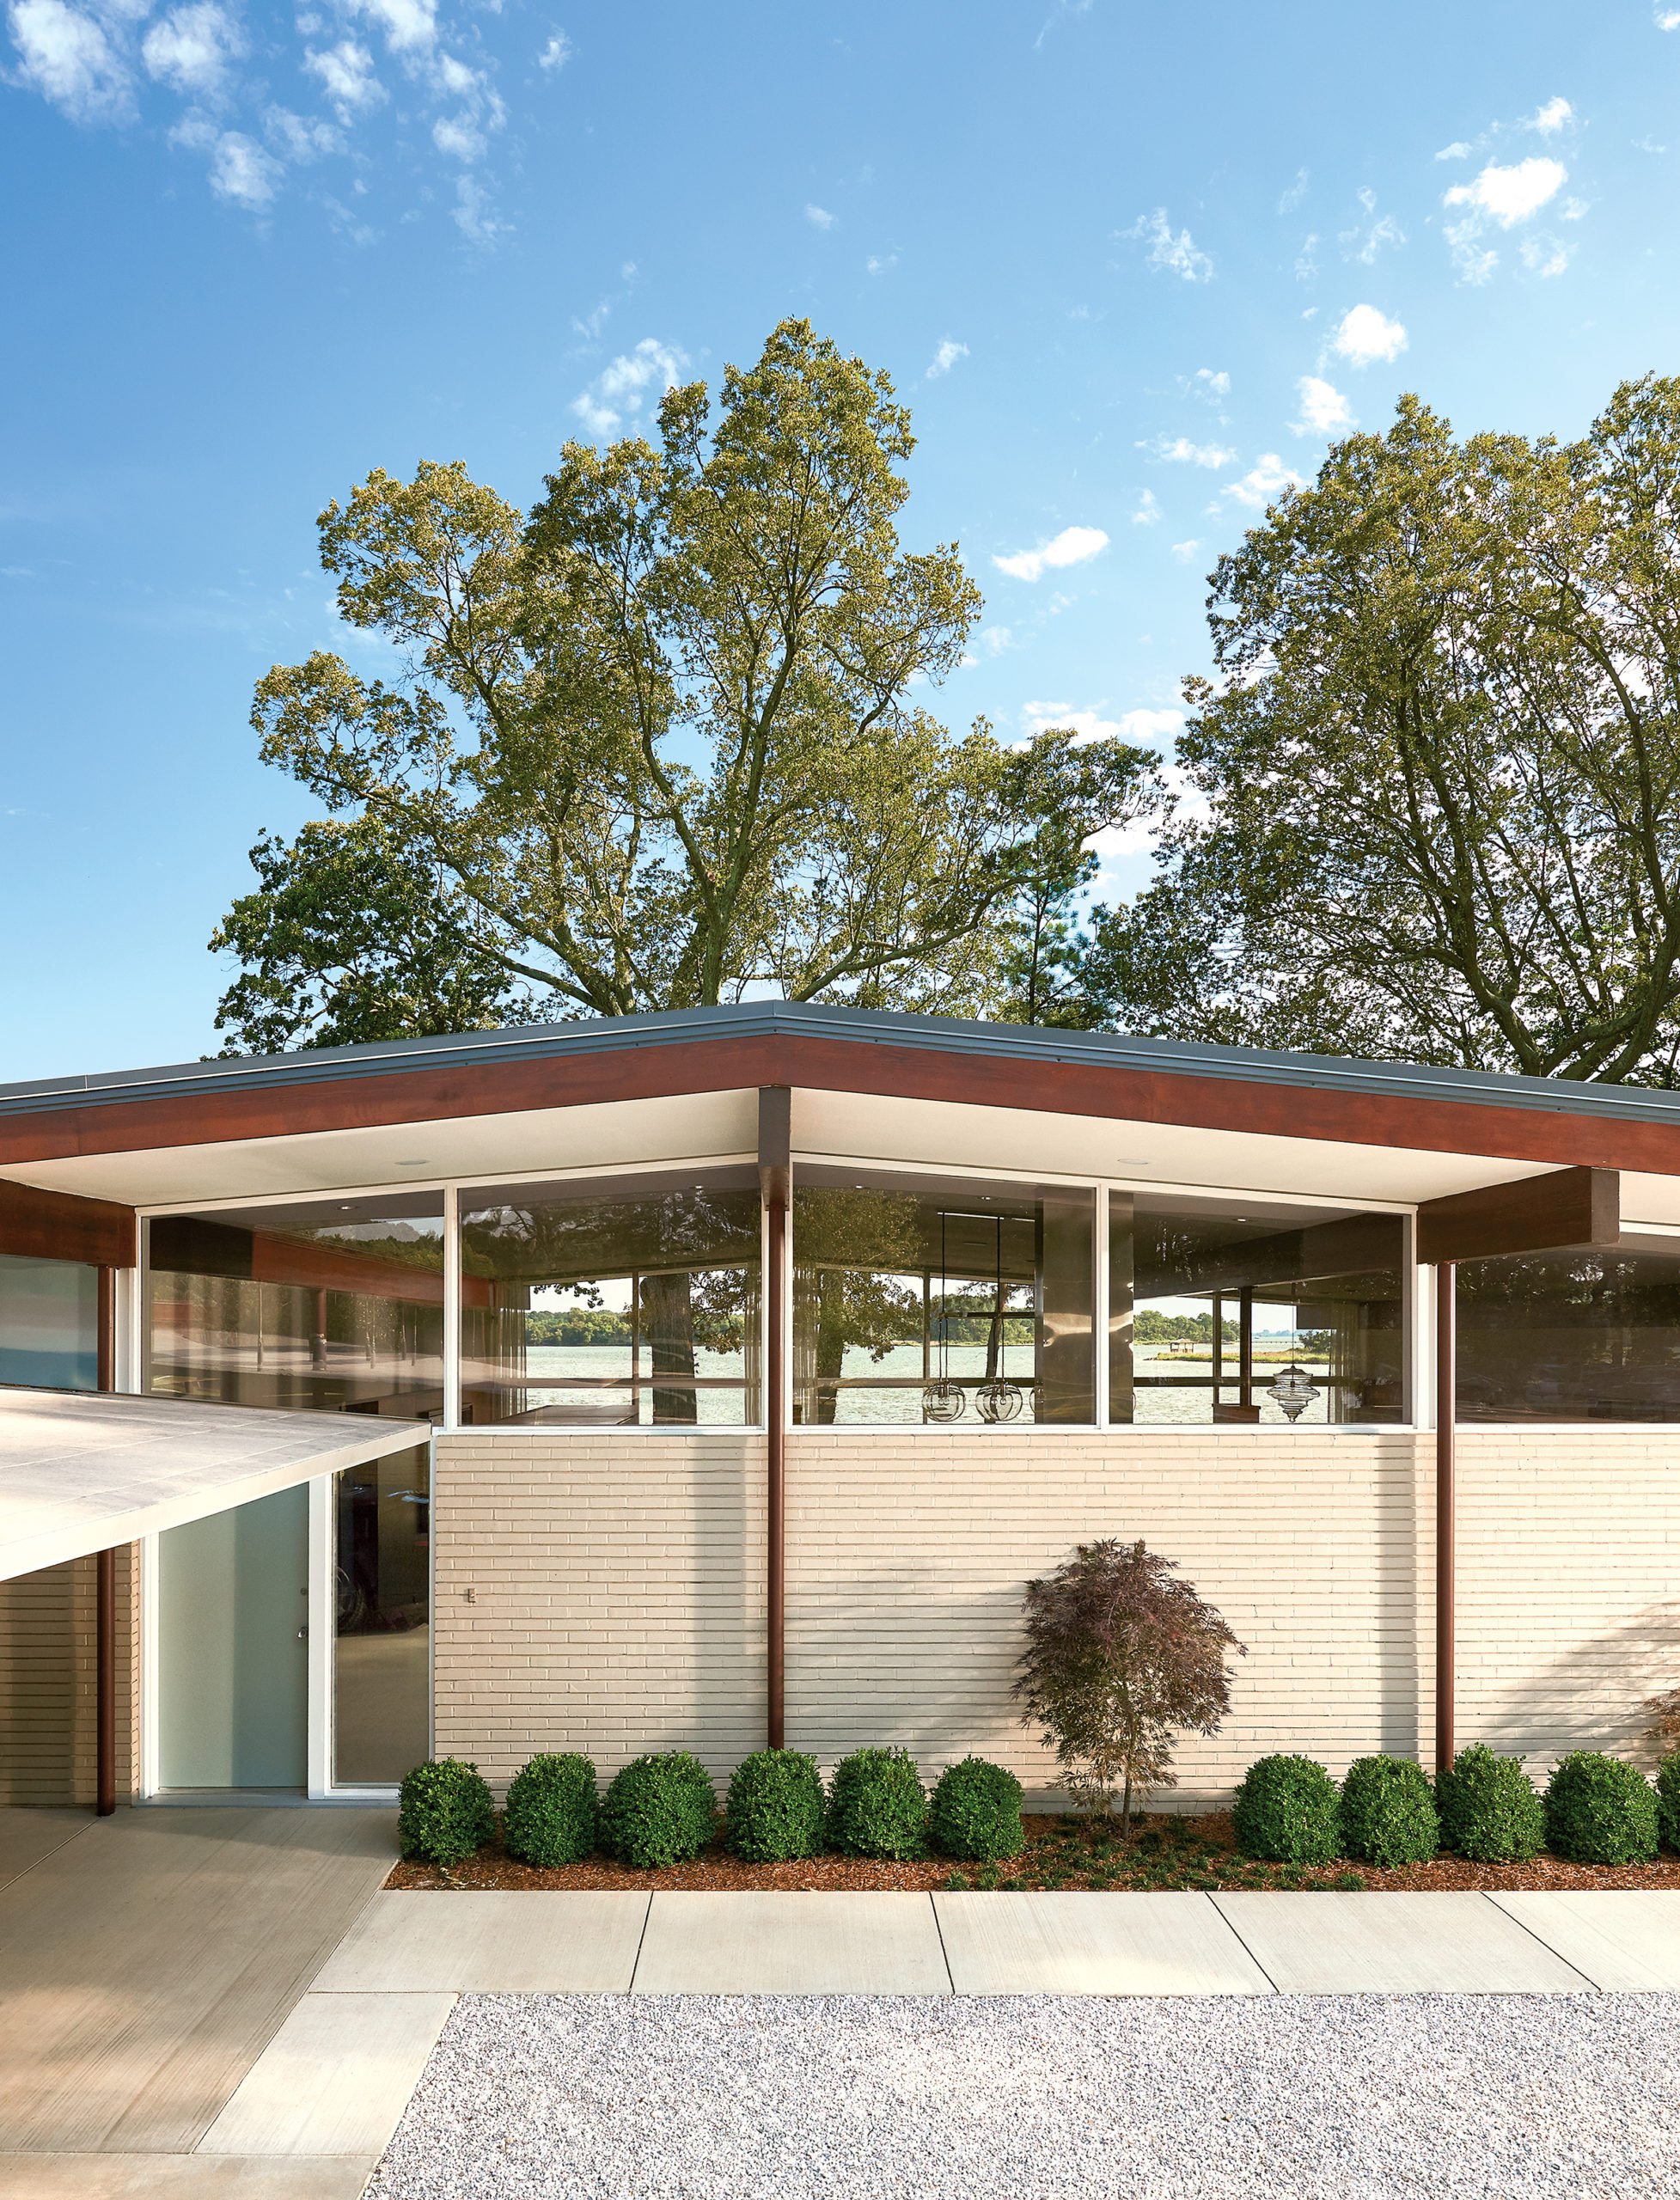 On the Eastern Shore, a Midcentury House Is Restored to Its Former Glory